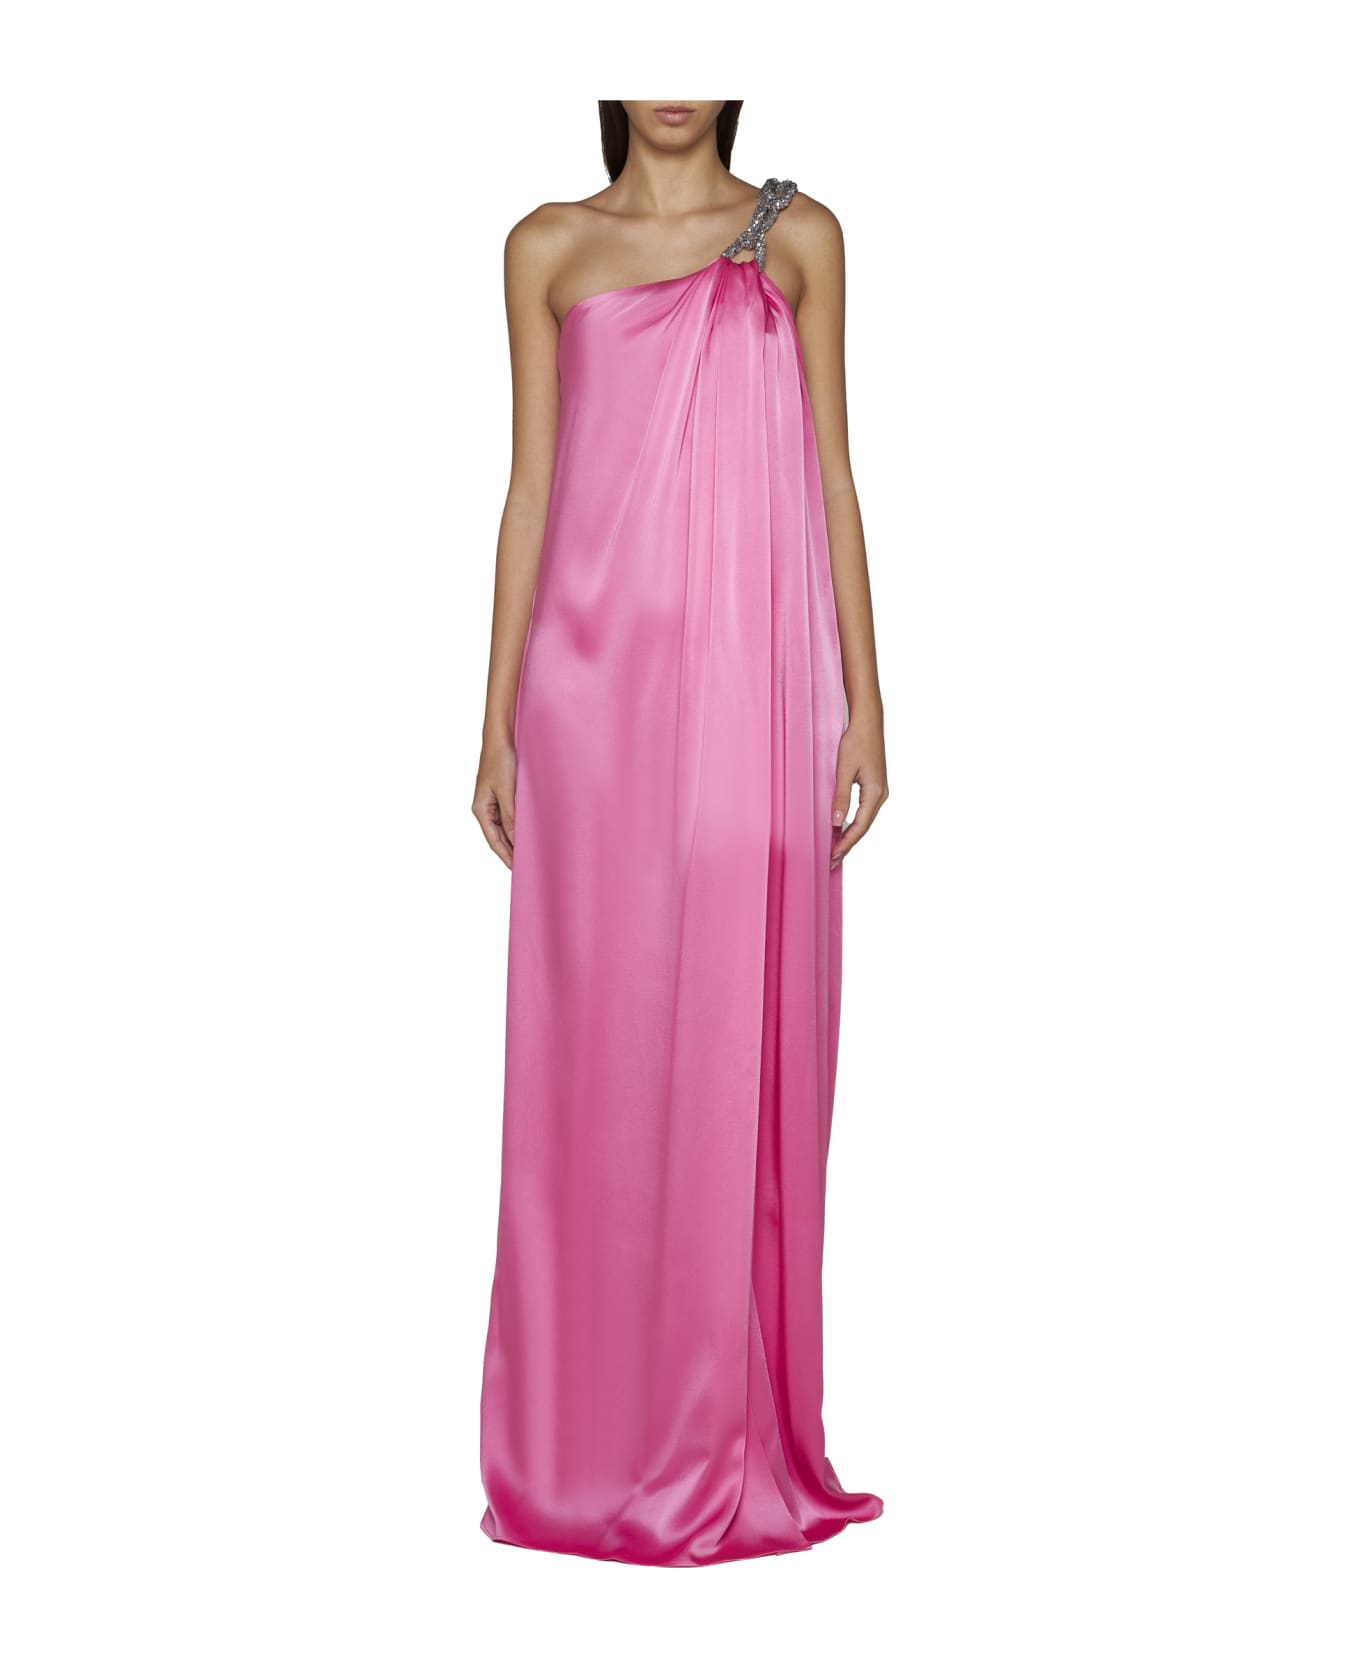 Stella McCartney One-shoulder Maxi Dress With Crystal Chain In Double Satin - Bright Pink